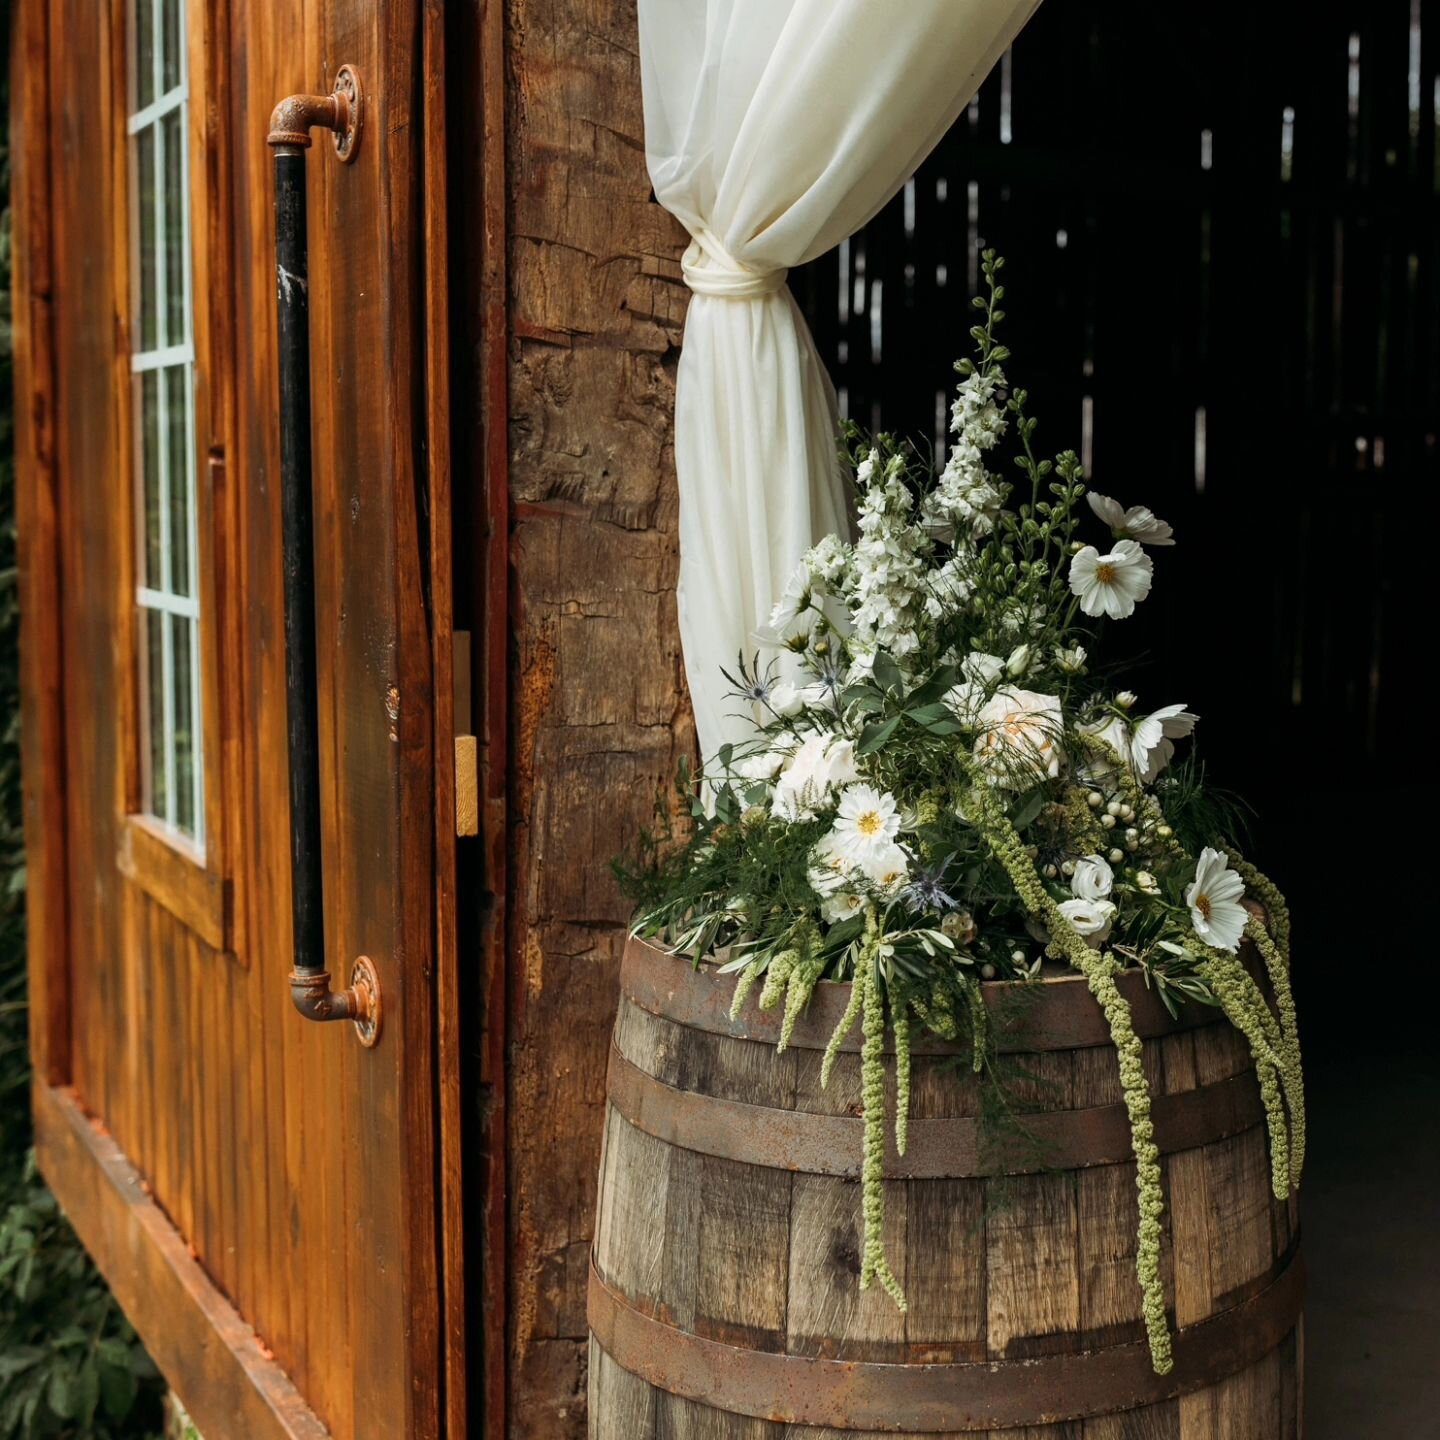 My first wedding ever in 2020.

The wine barrel topper that is still my favorite of all time. Creating a wedding bouquet to look like it had eucalyptus but couldn't actually have any eucalyptus was a major nod to the local flower movement. Making cos